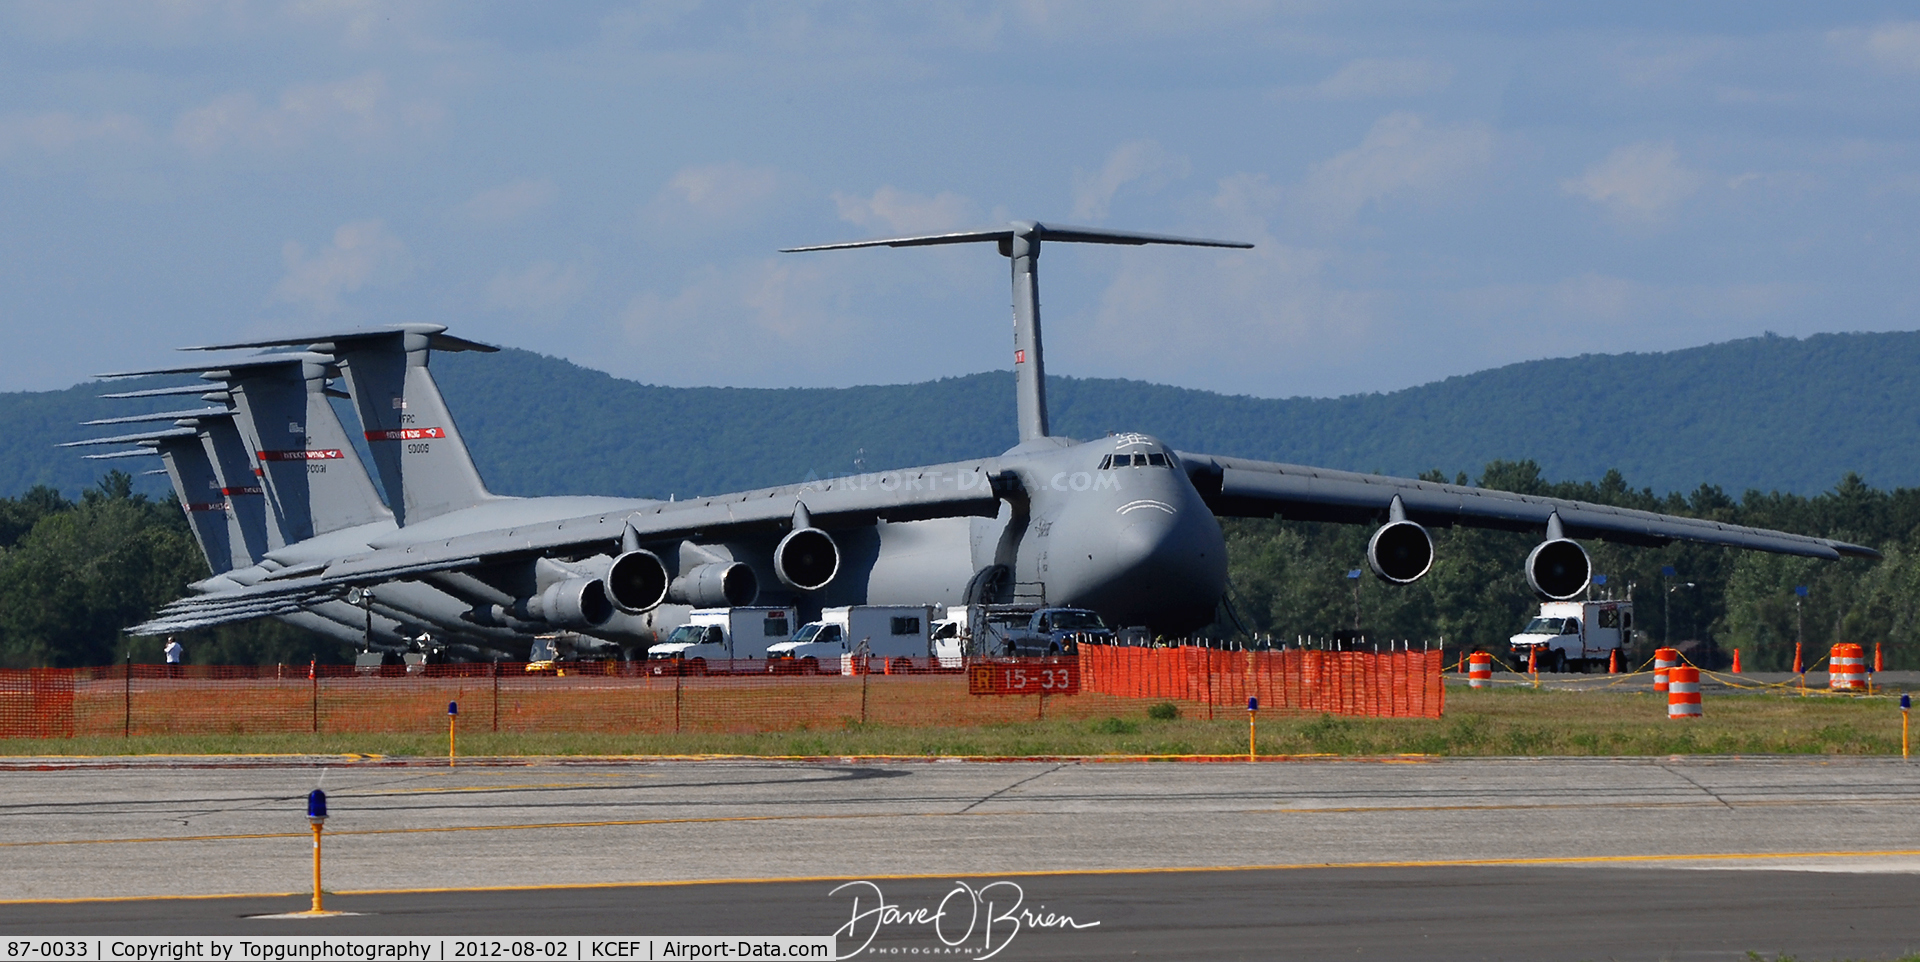 87-0033, 1988 Lockheed C-5B Galaxy C/N 500-0119, Clearing the ramp and tucking all these C-5's off out of the way